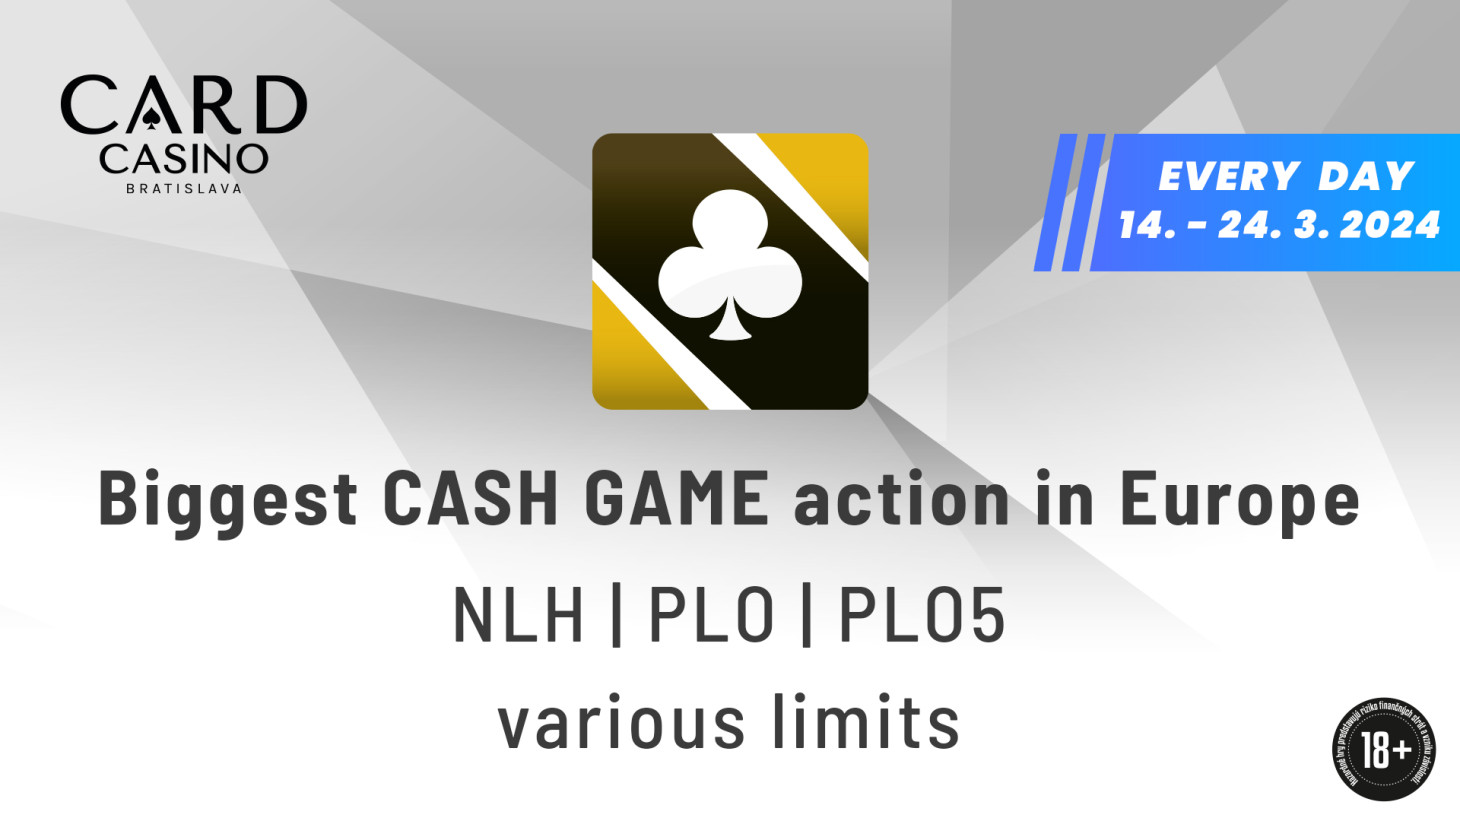 Cash game dream. It will be played in Bratislava during the Norwegian Championship